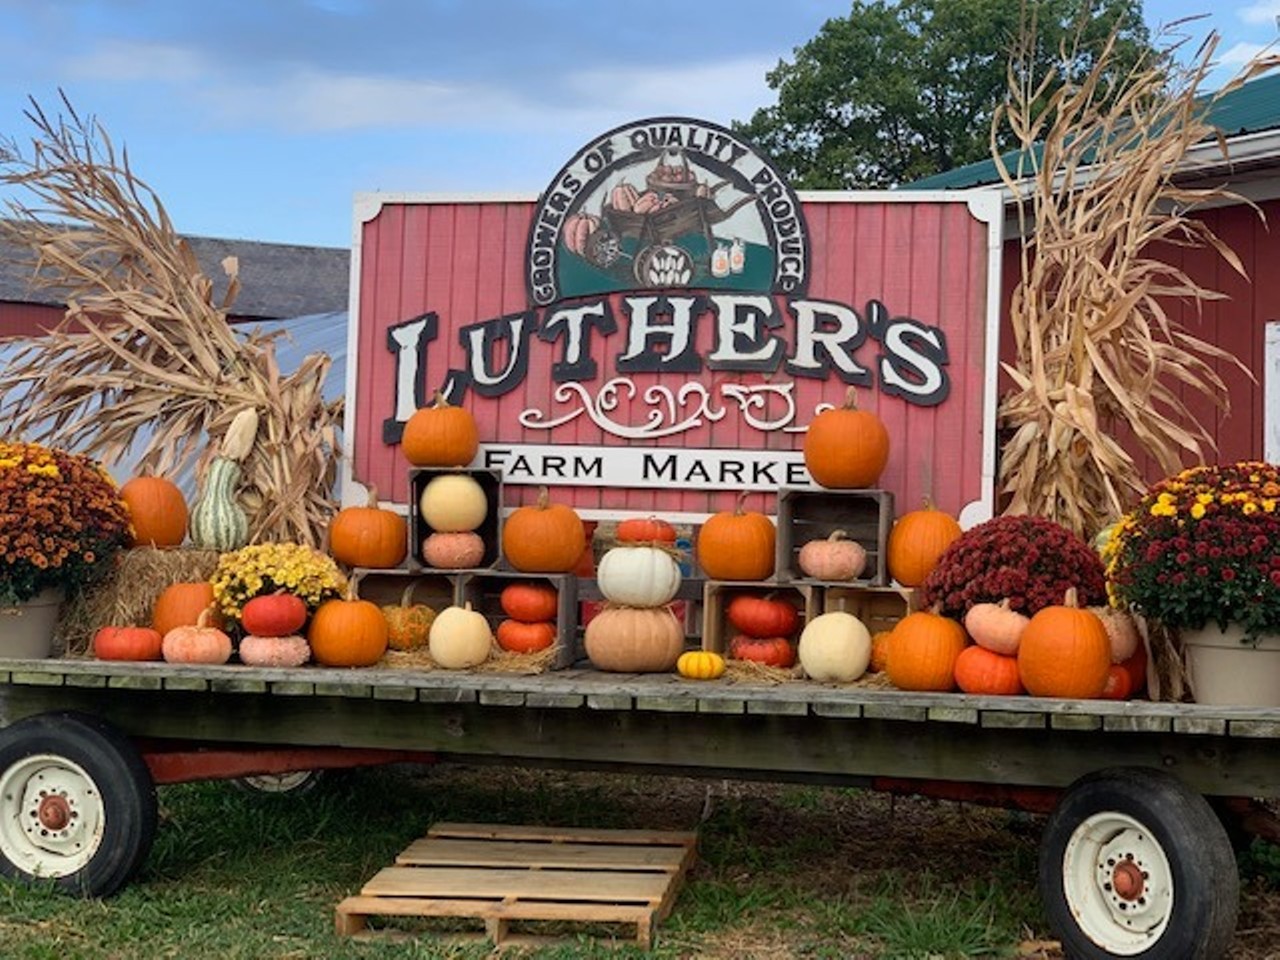  Luther&#146;s Farm Market Fall Fest
5150 Alger Rd., Richfield
Fall Fest is held on Saturdays and Sundays in October (10 a.m. to 6 p.m.) and features plenty of family-friendly activities, including hayrides, corn and hay mazes, games, a petting farm, and food. The most famous attraction is the pumpkin cannon. The market also offers pumpkins, corn stalks, mums, and straw bales until October 31 for fall decorating.
Photo via Luther's Farm and Market/Facebook